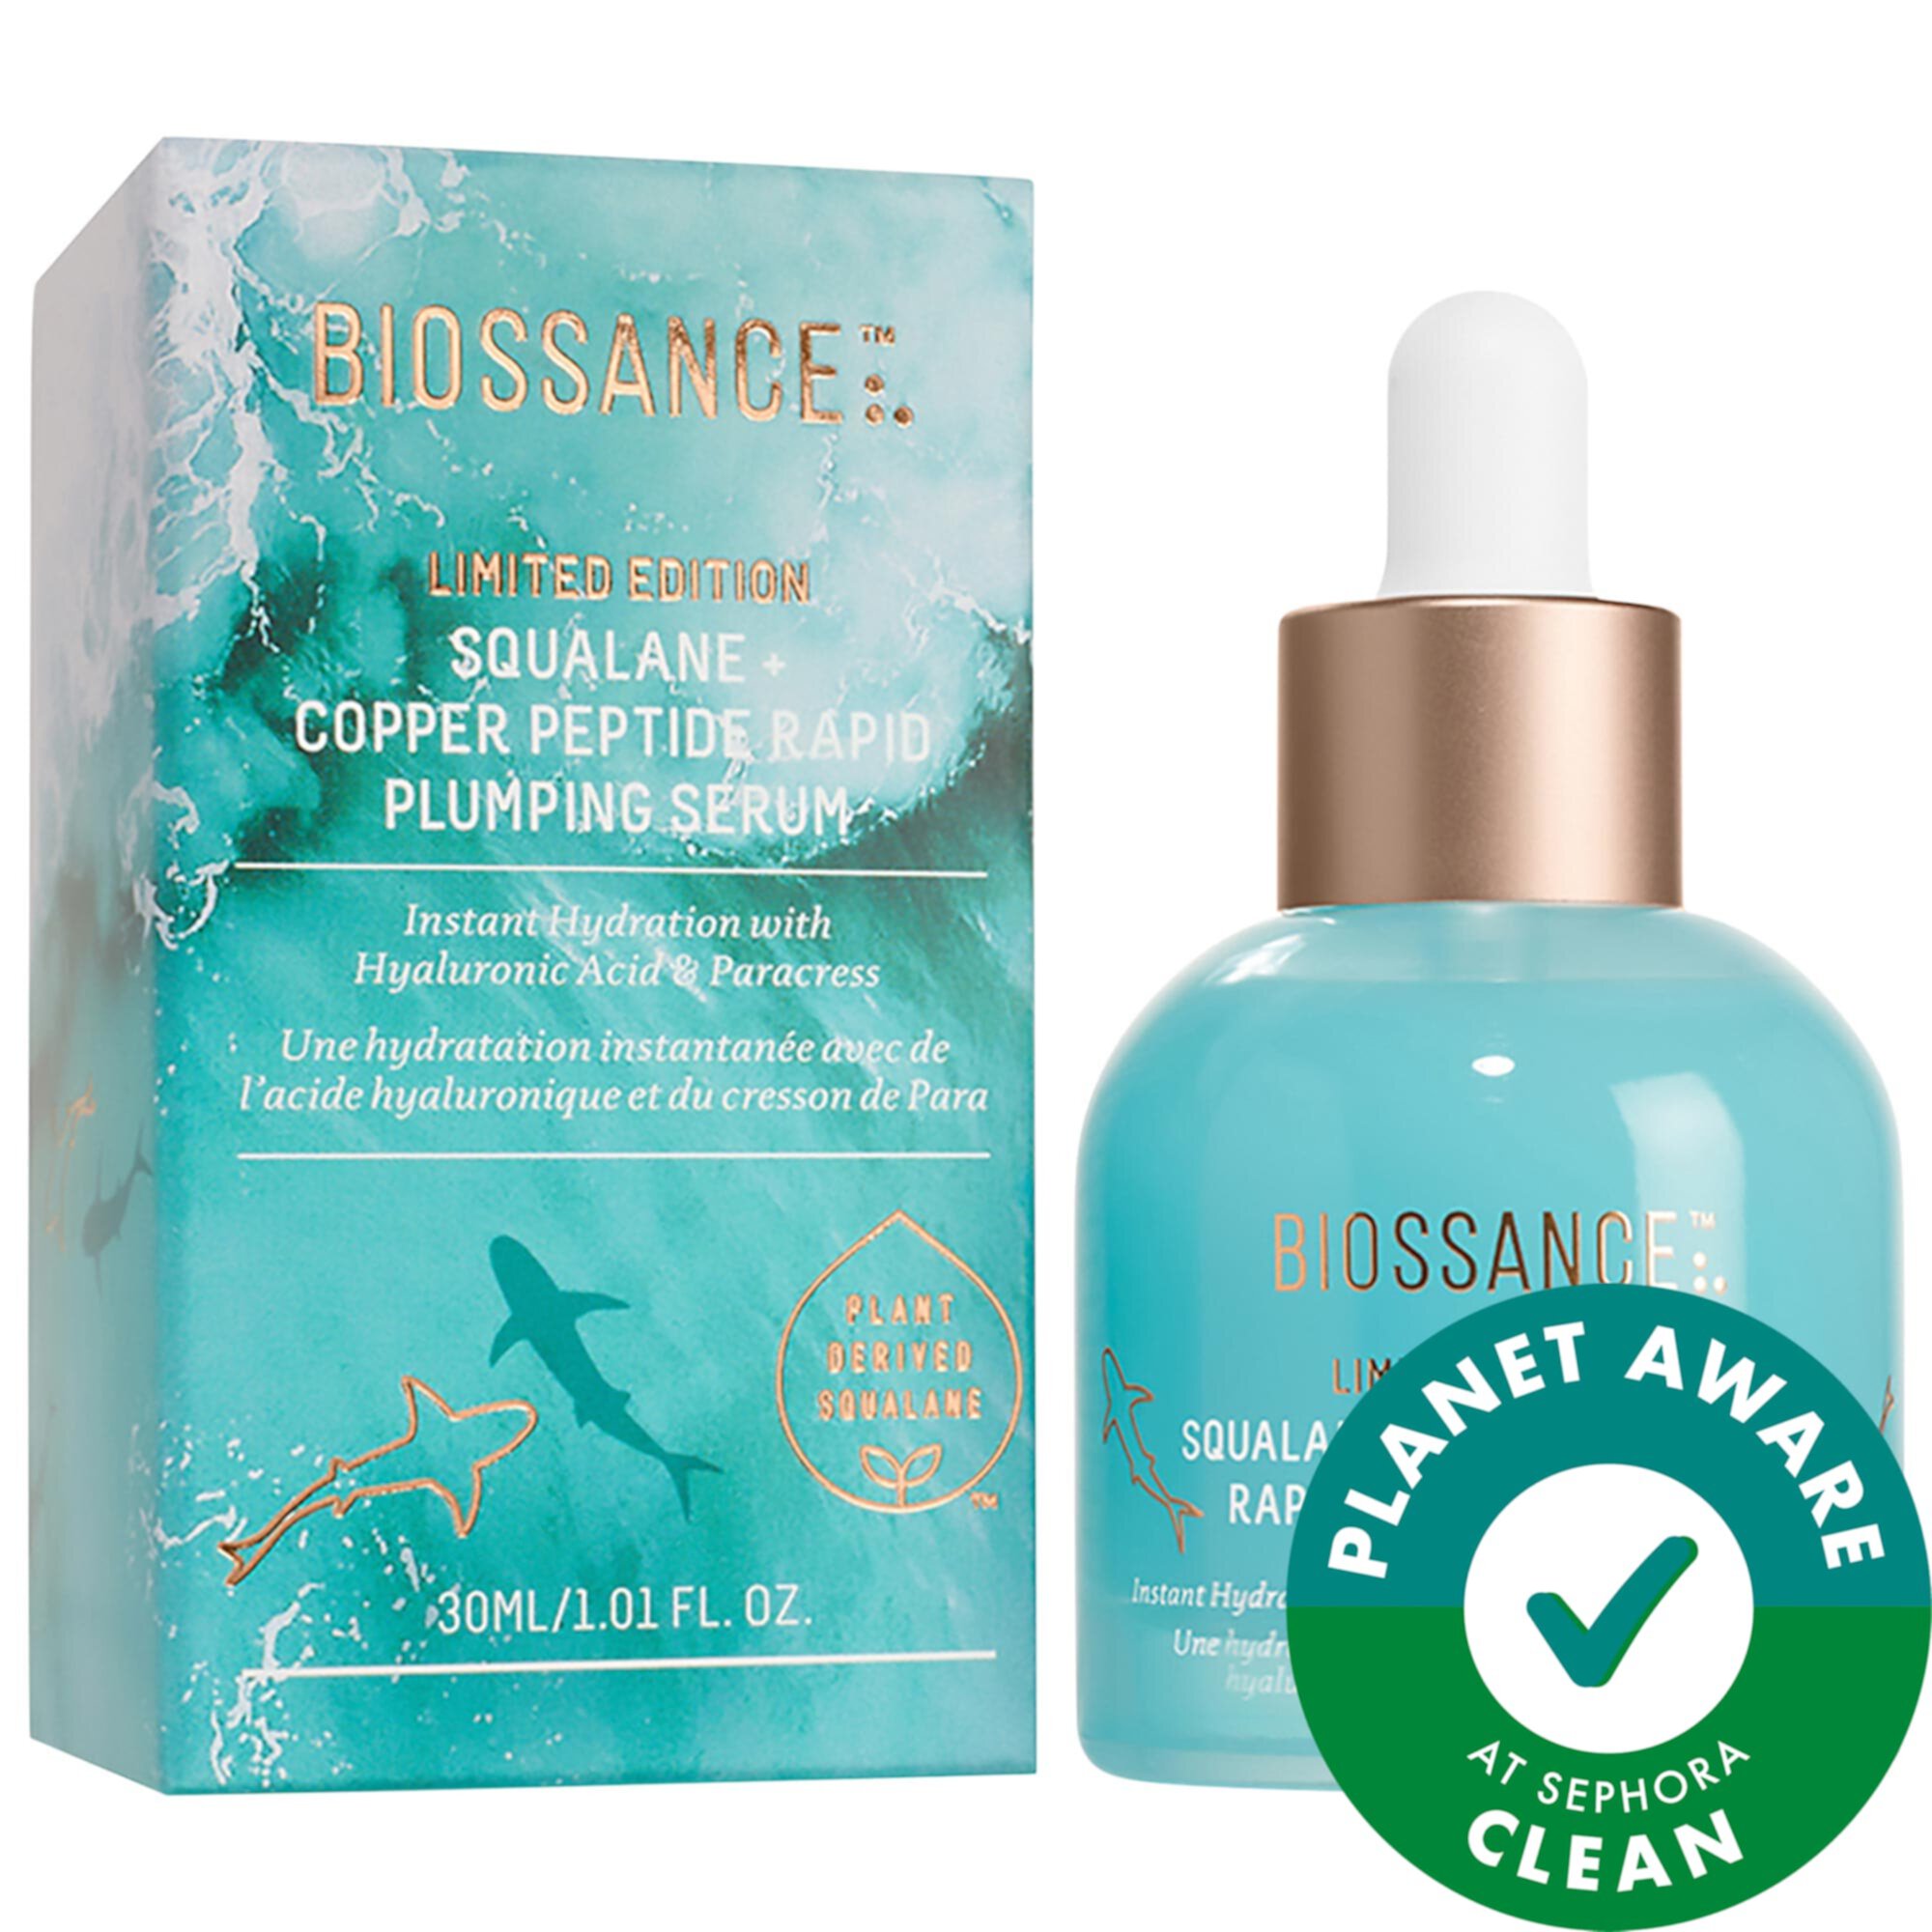 Limited Edition Squalane + Hyaluronic Acid Copper Peptide Rapid Plumping Serum Biossance